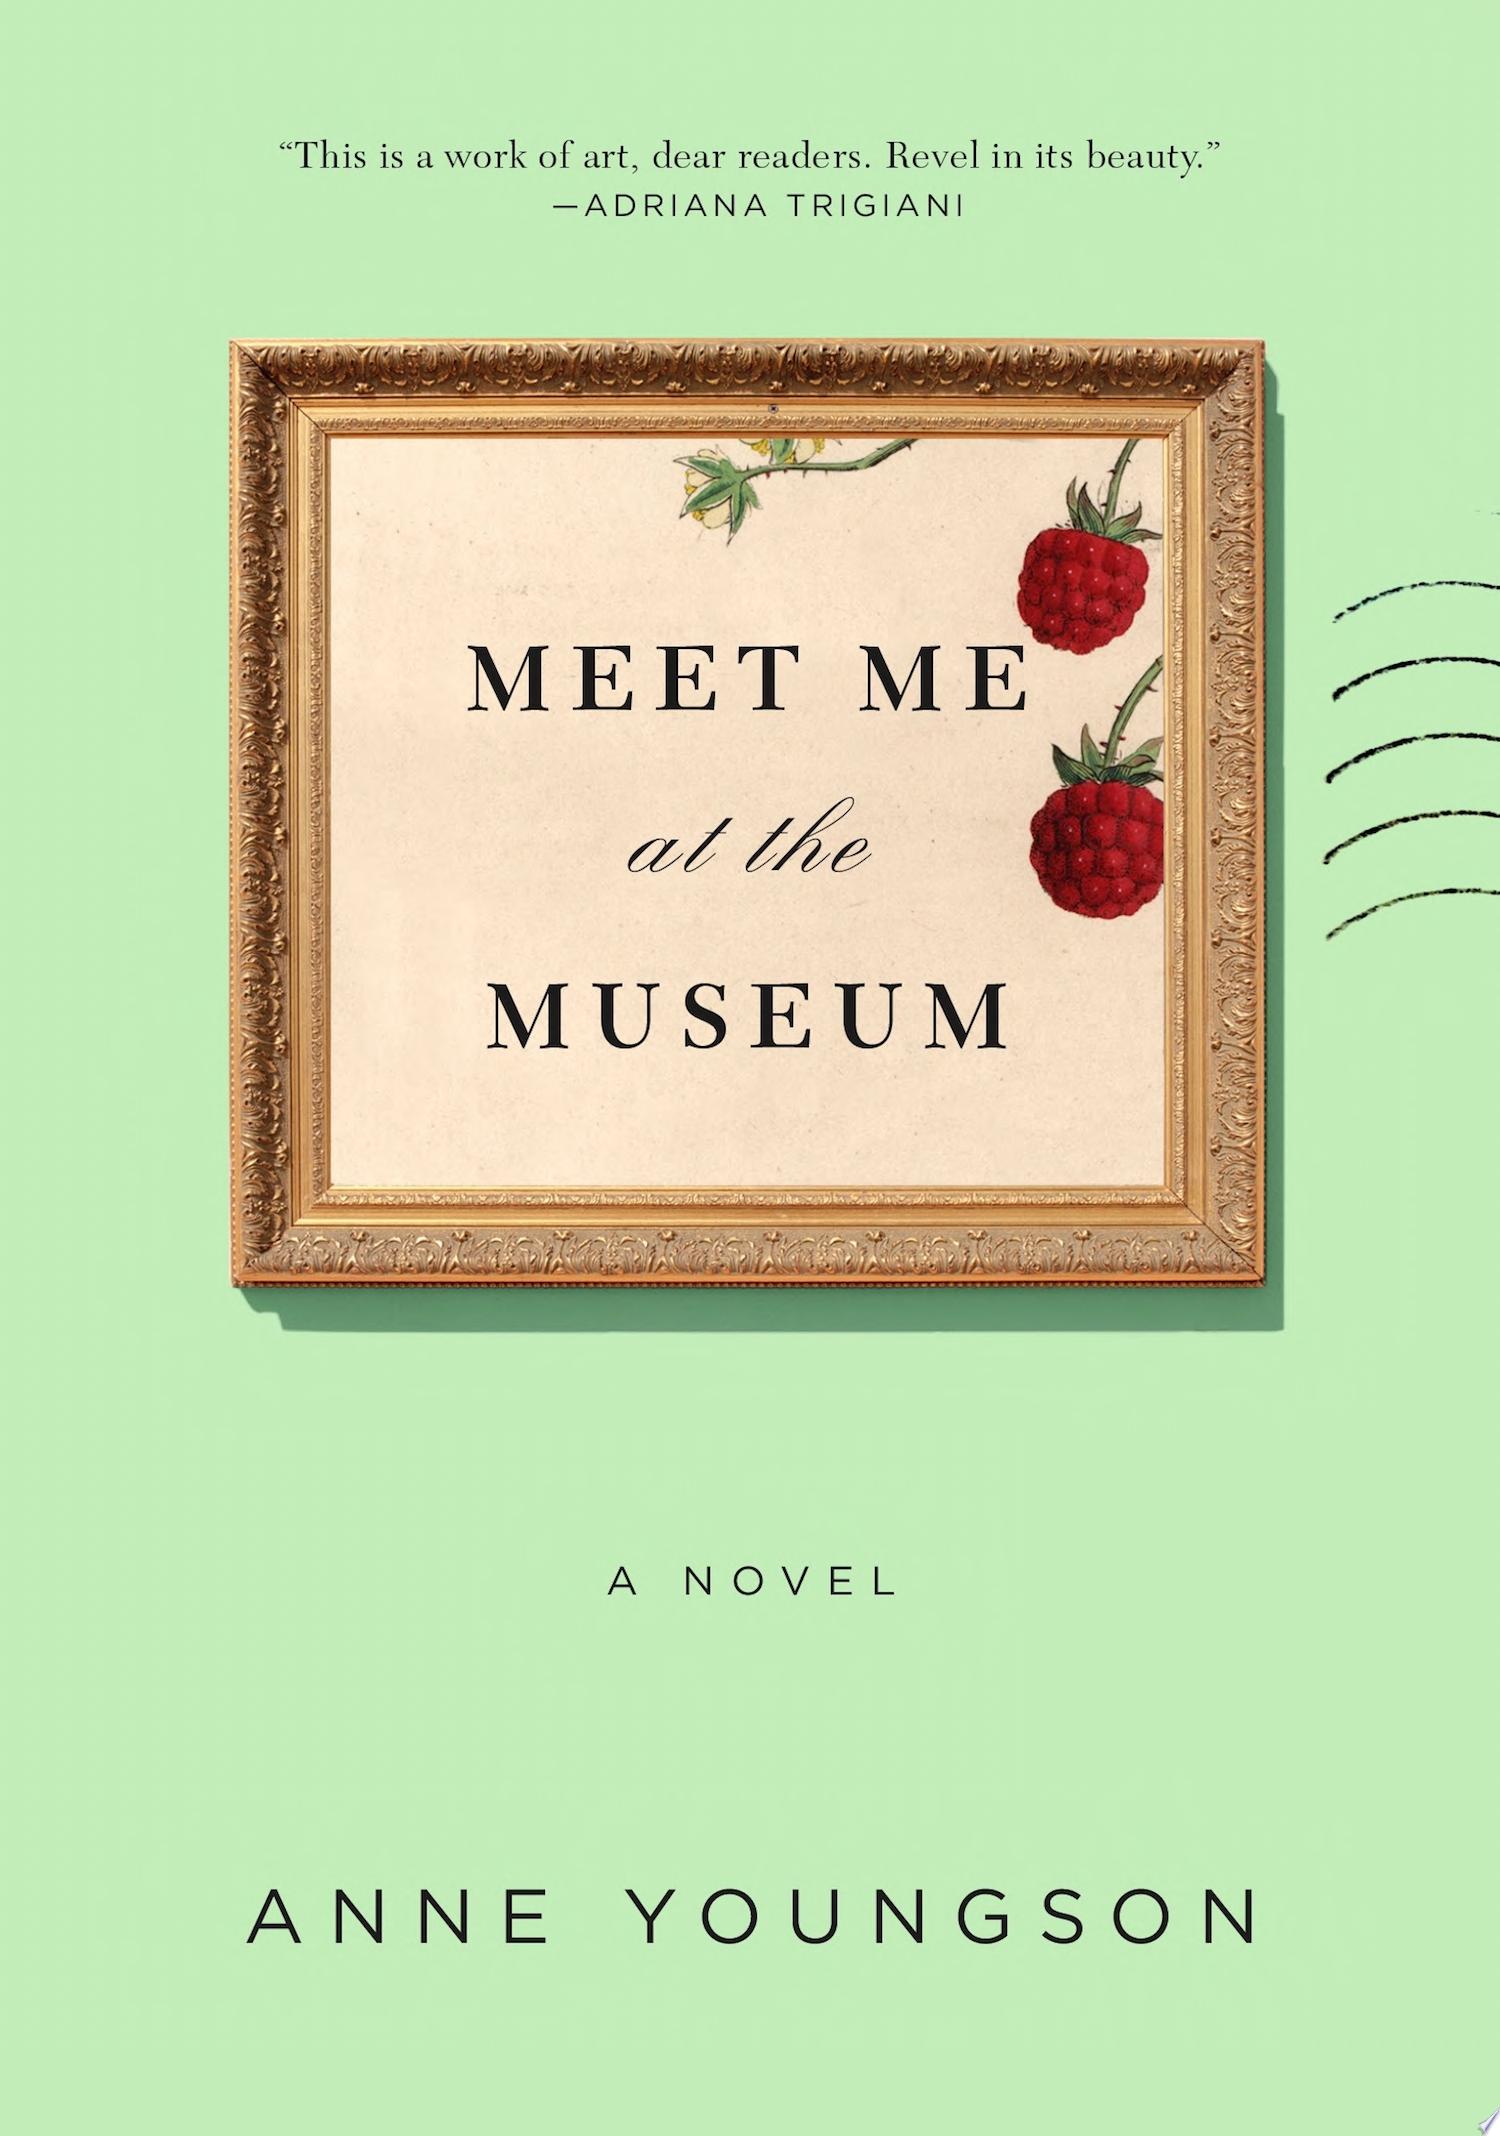 Image for "Meet Me at the Museum"